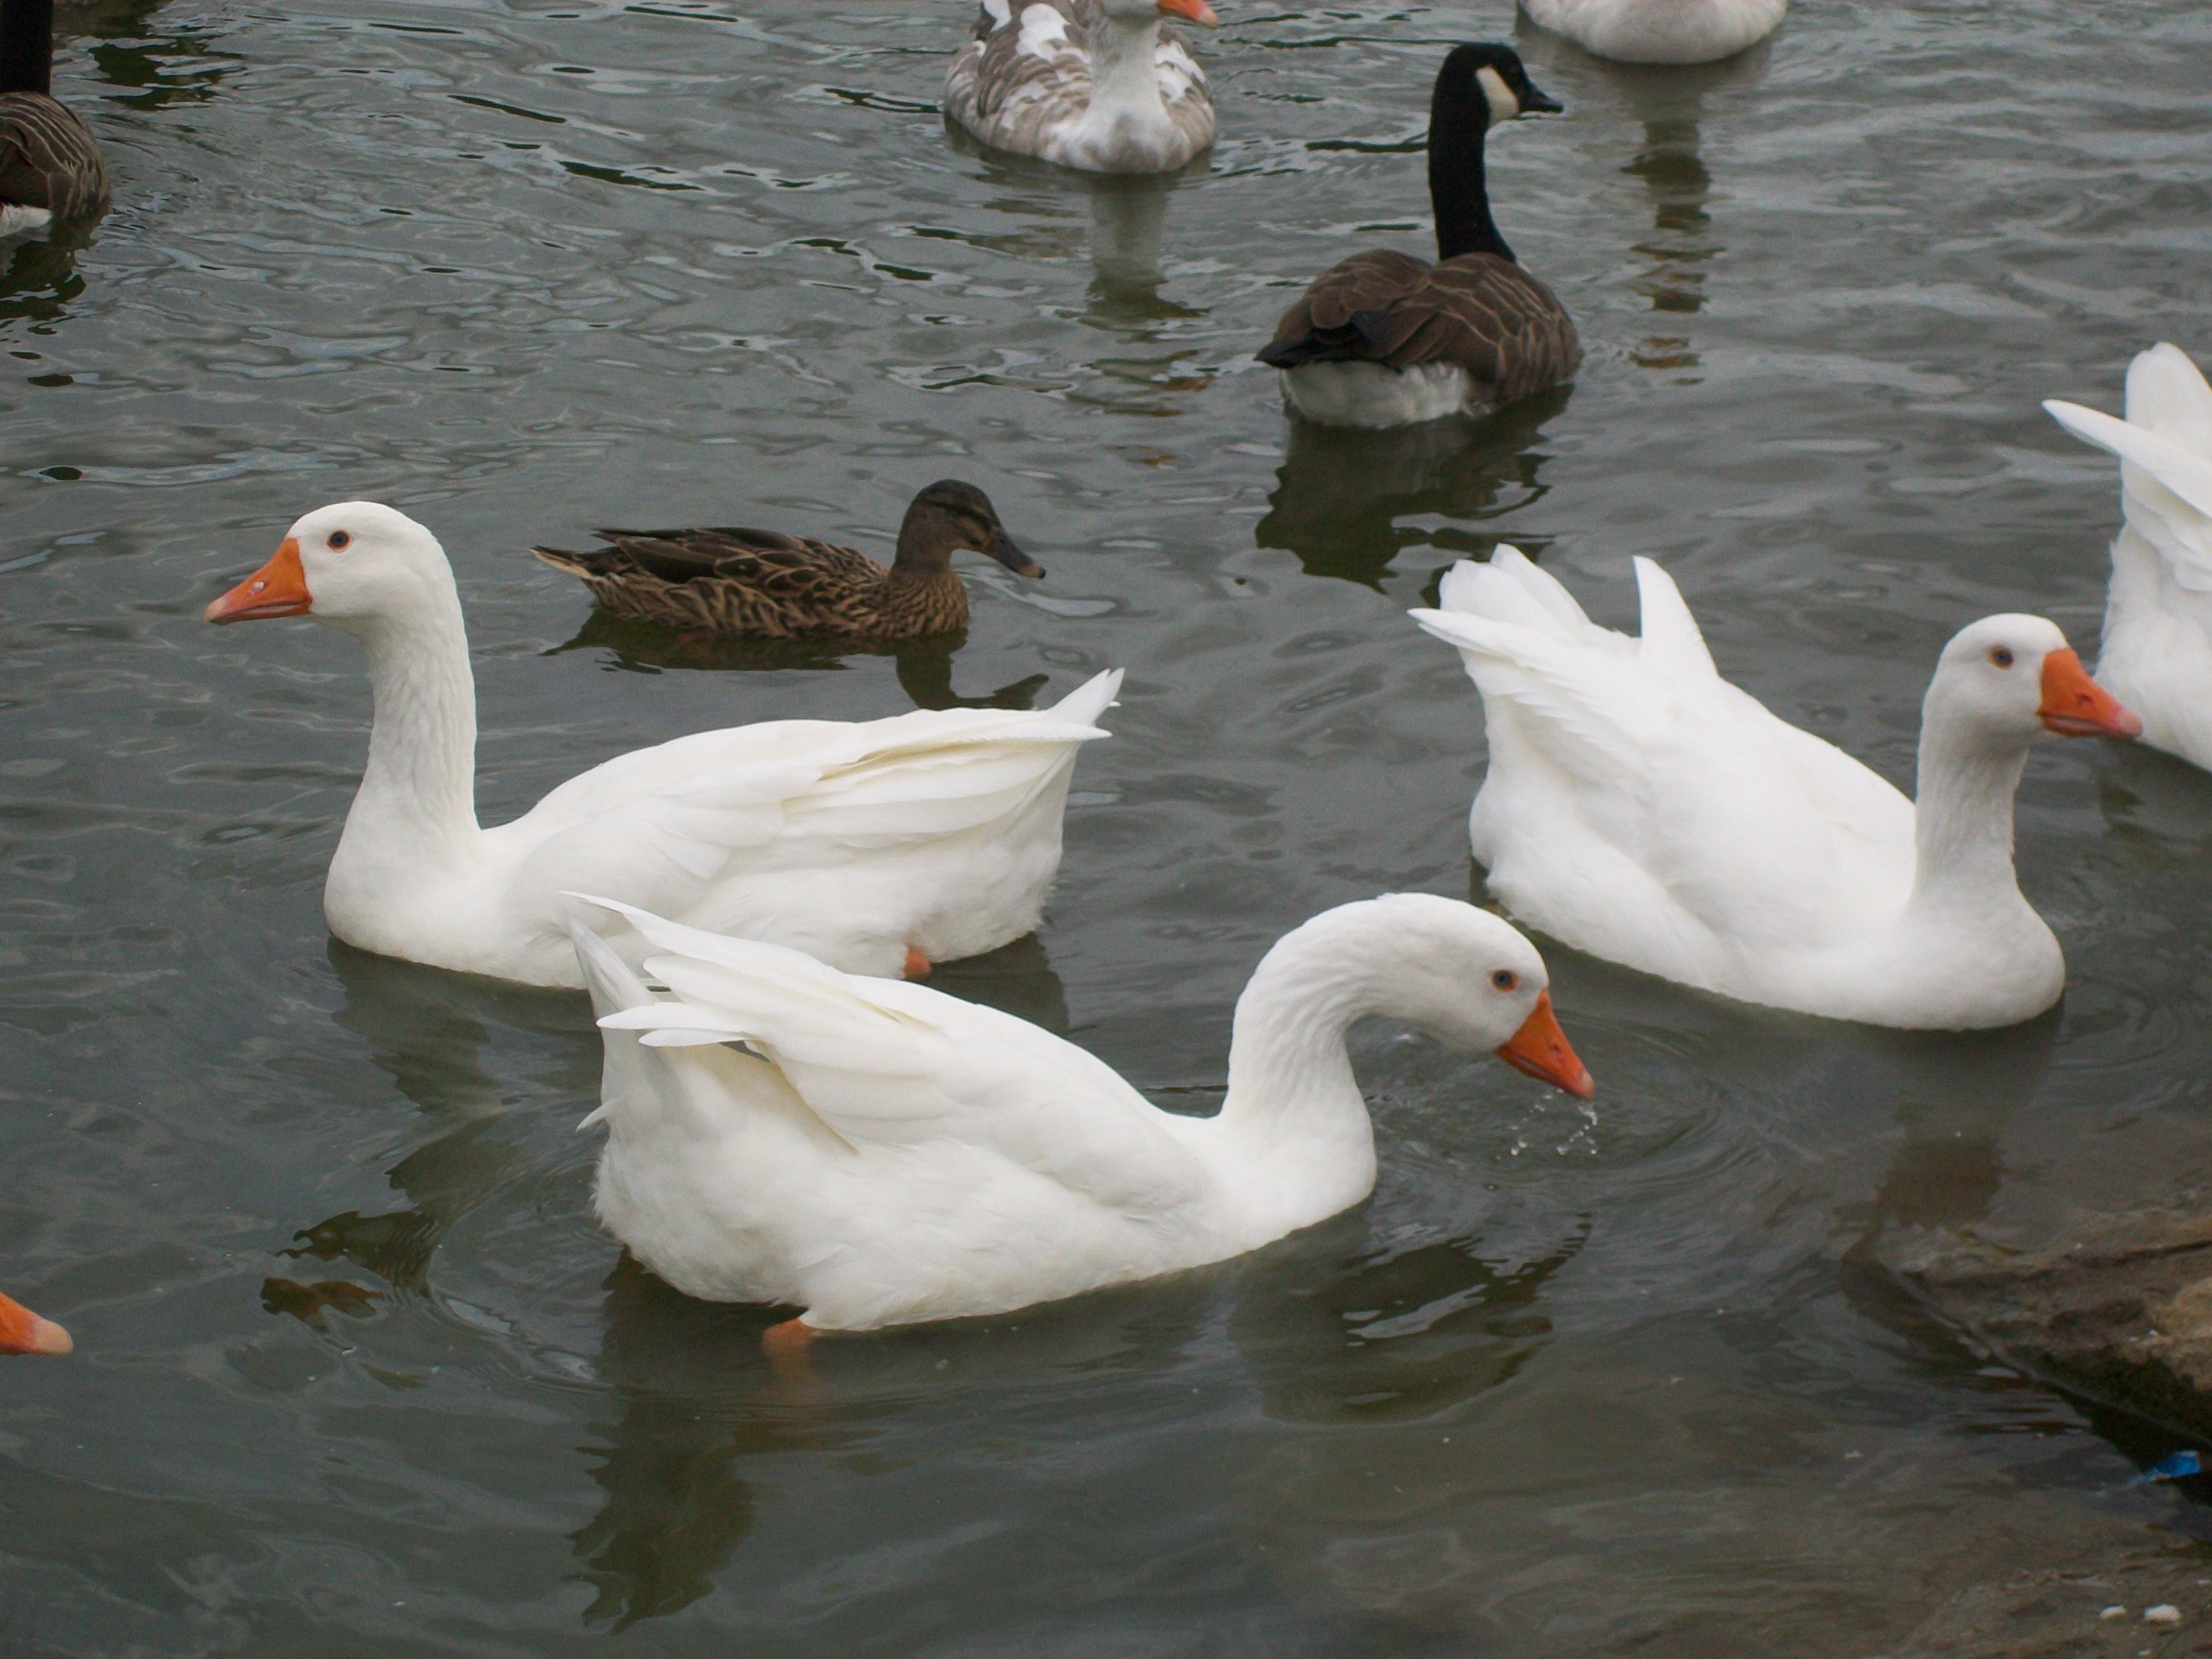 File:Ducks and geese (3855500213).jpg - Wikimedia Commons